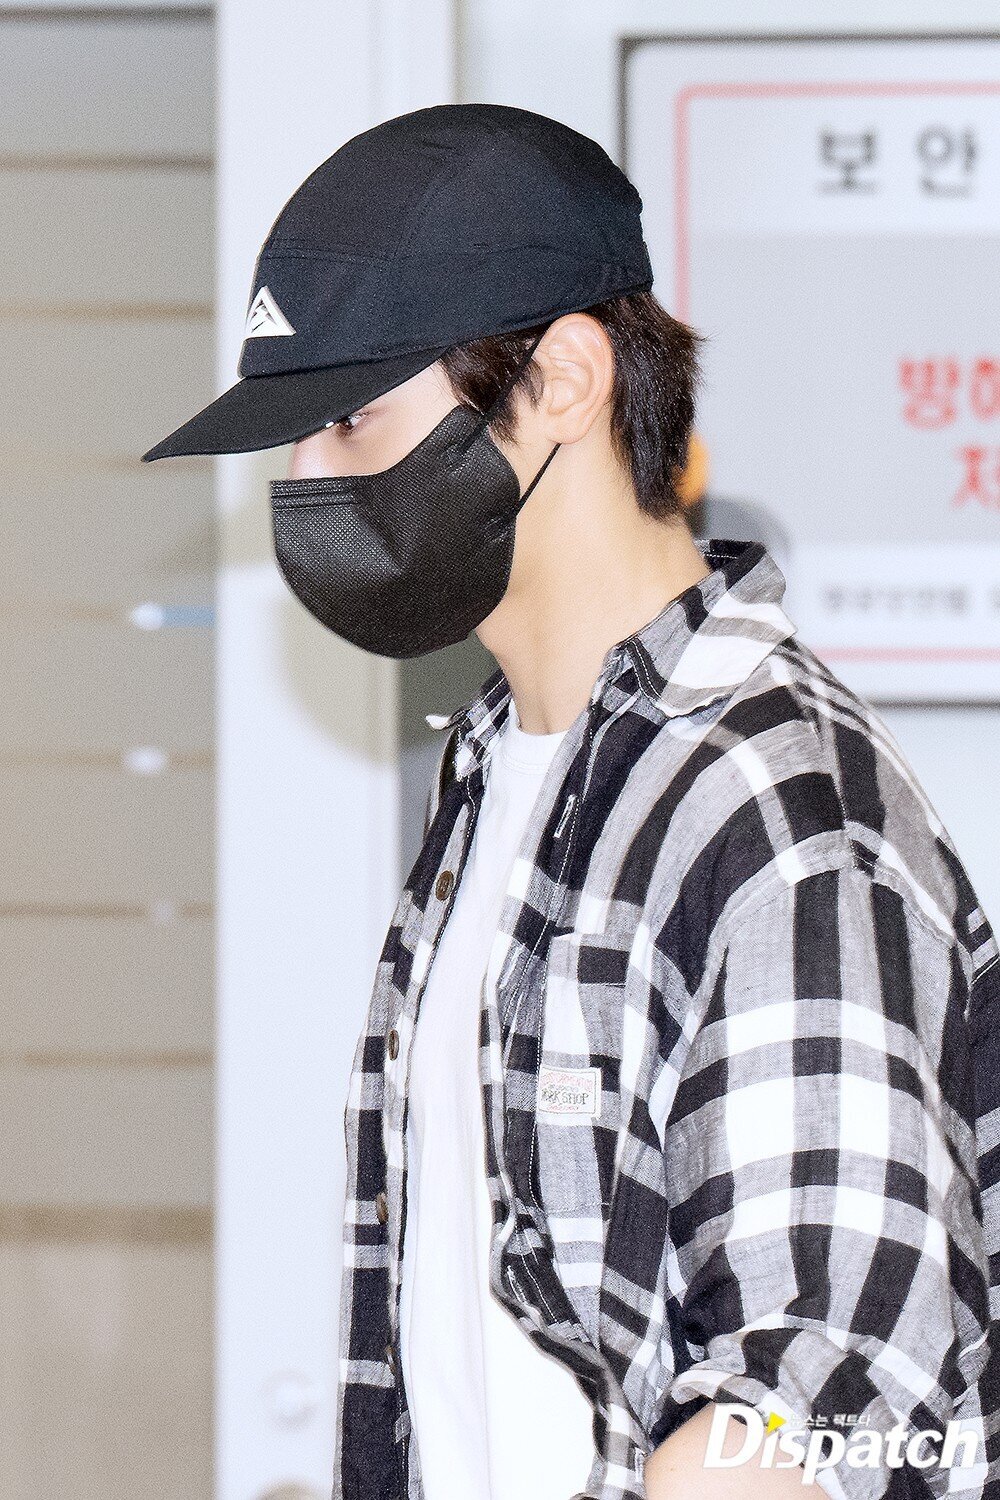 230606 Cha Eunwoo at Incheon International Airport Departure to Paris,  France for Chaumet Event